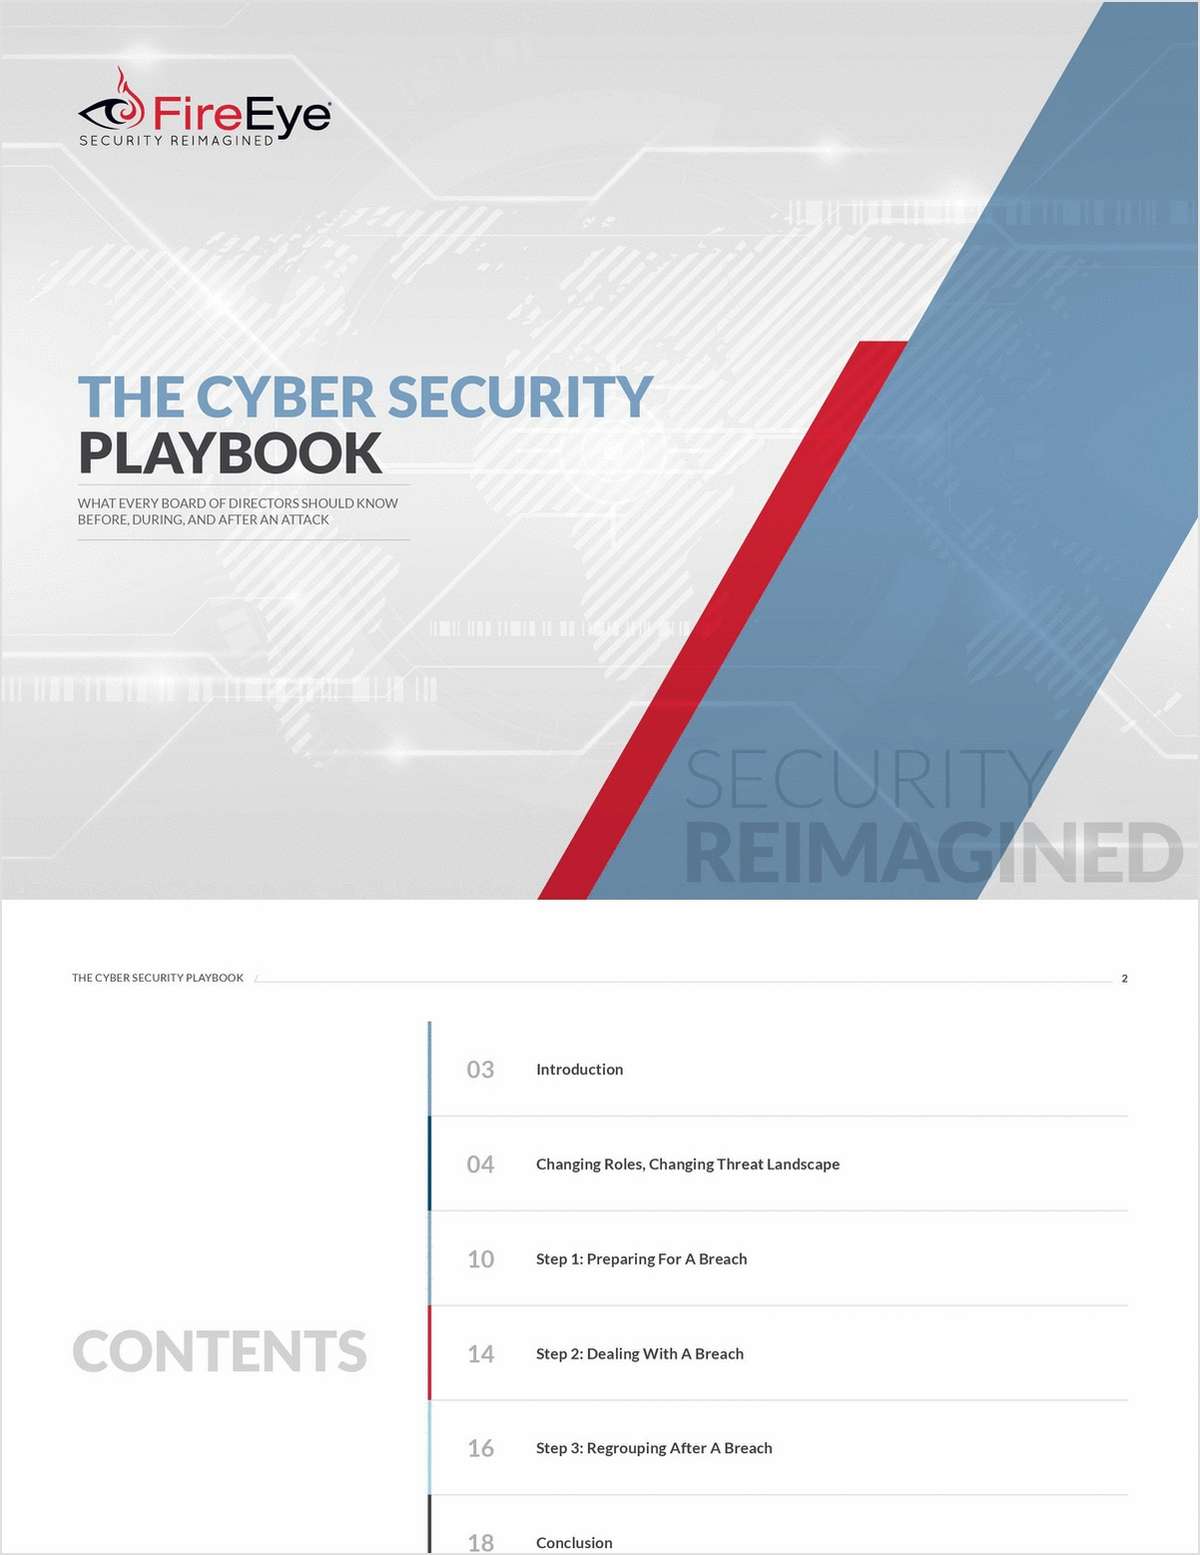 The Cyber Security Playbook: What Every Board Of Directors Should Know Before, During, And After An Attack.